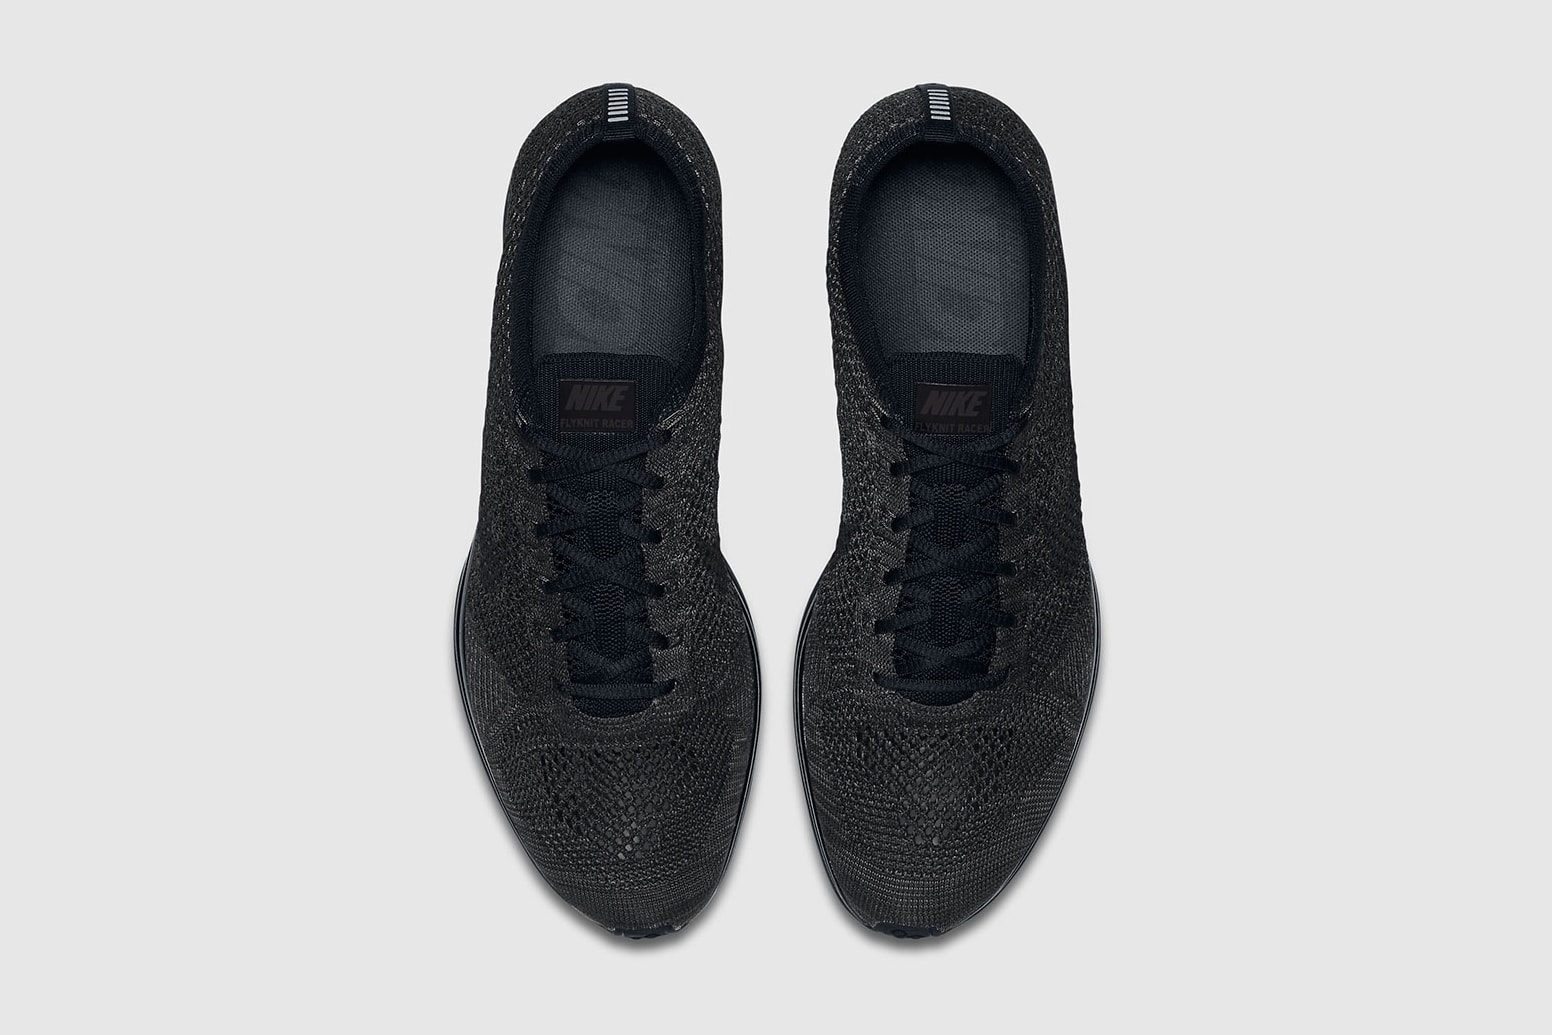 Nike Flyknit Racer "Triple Black" Official Images